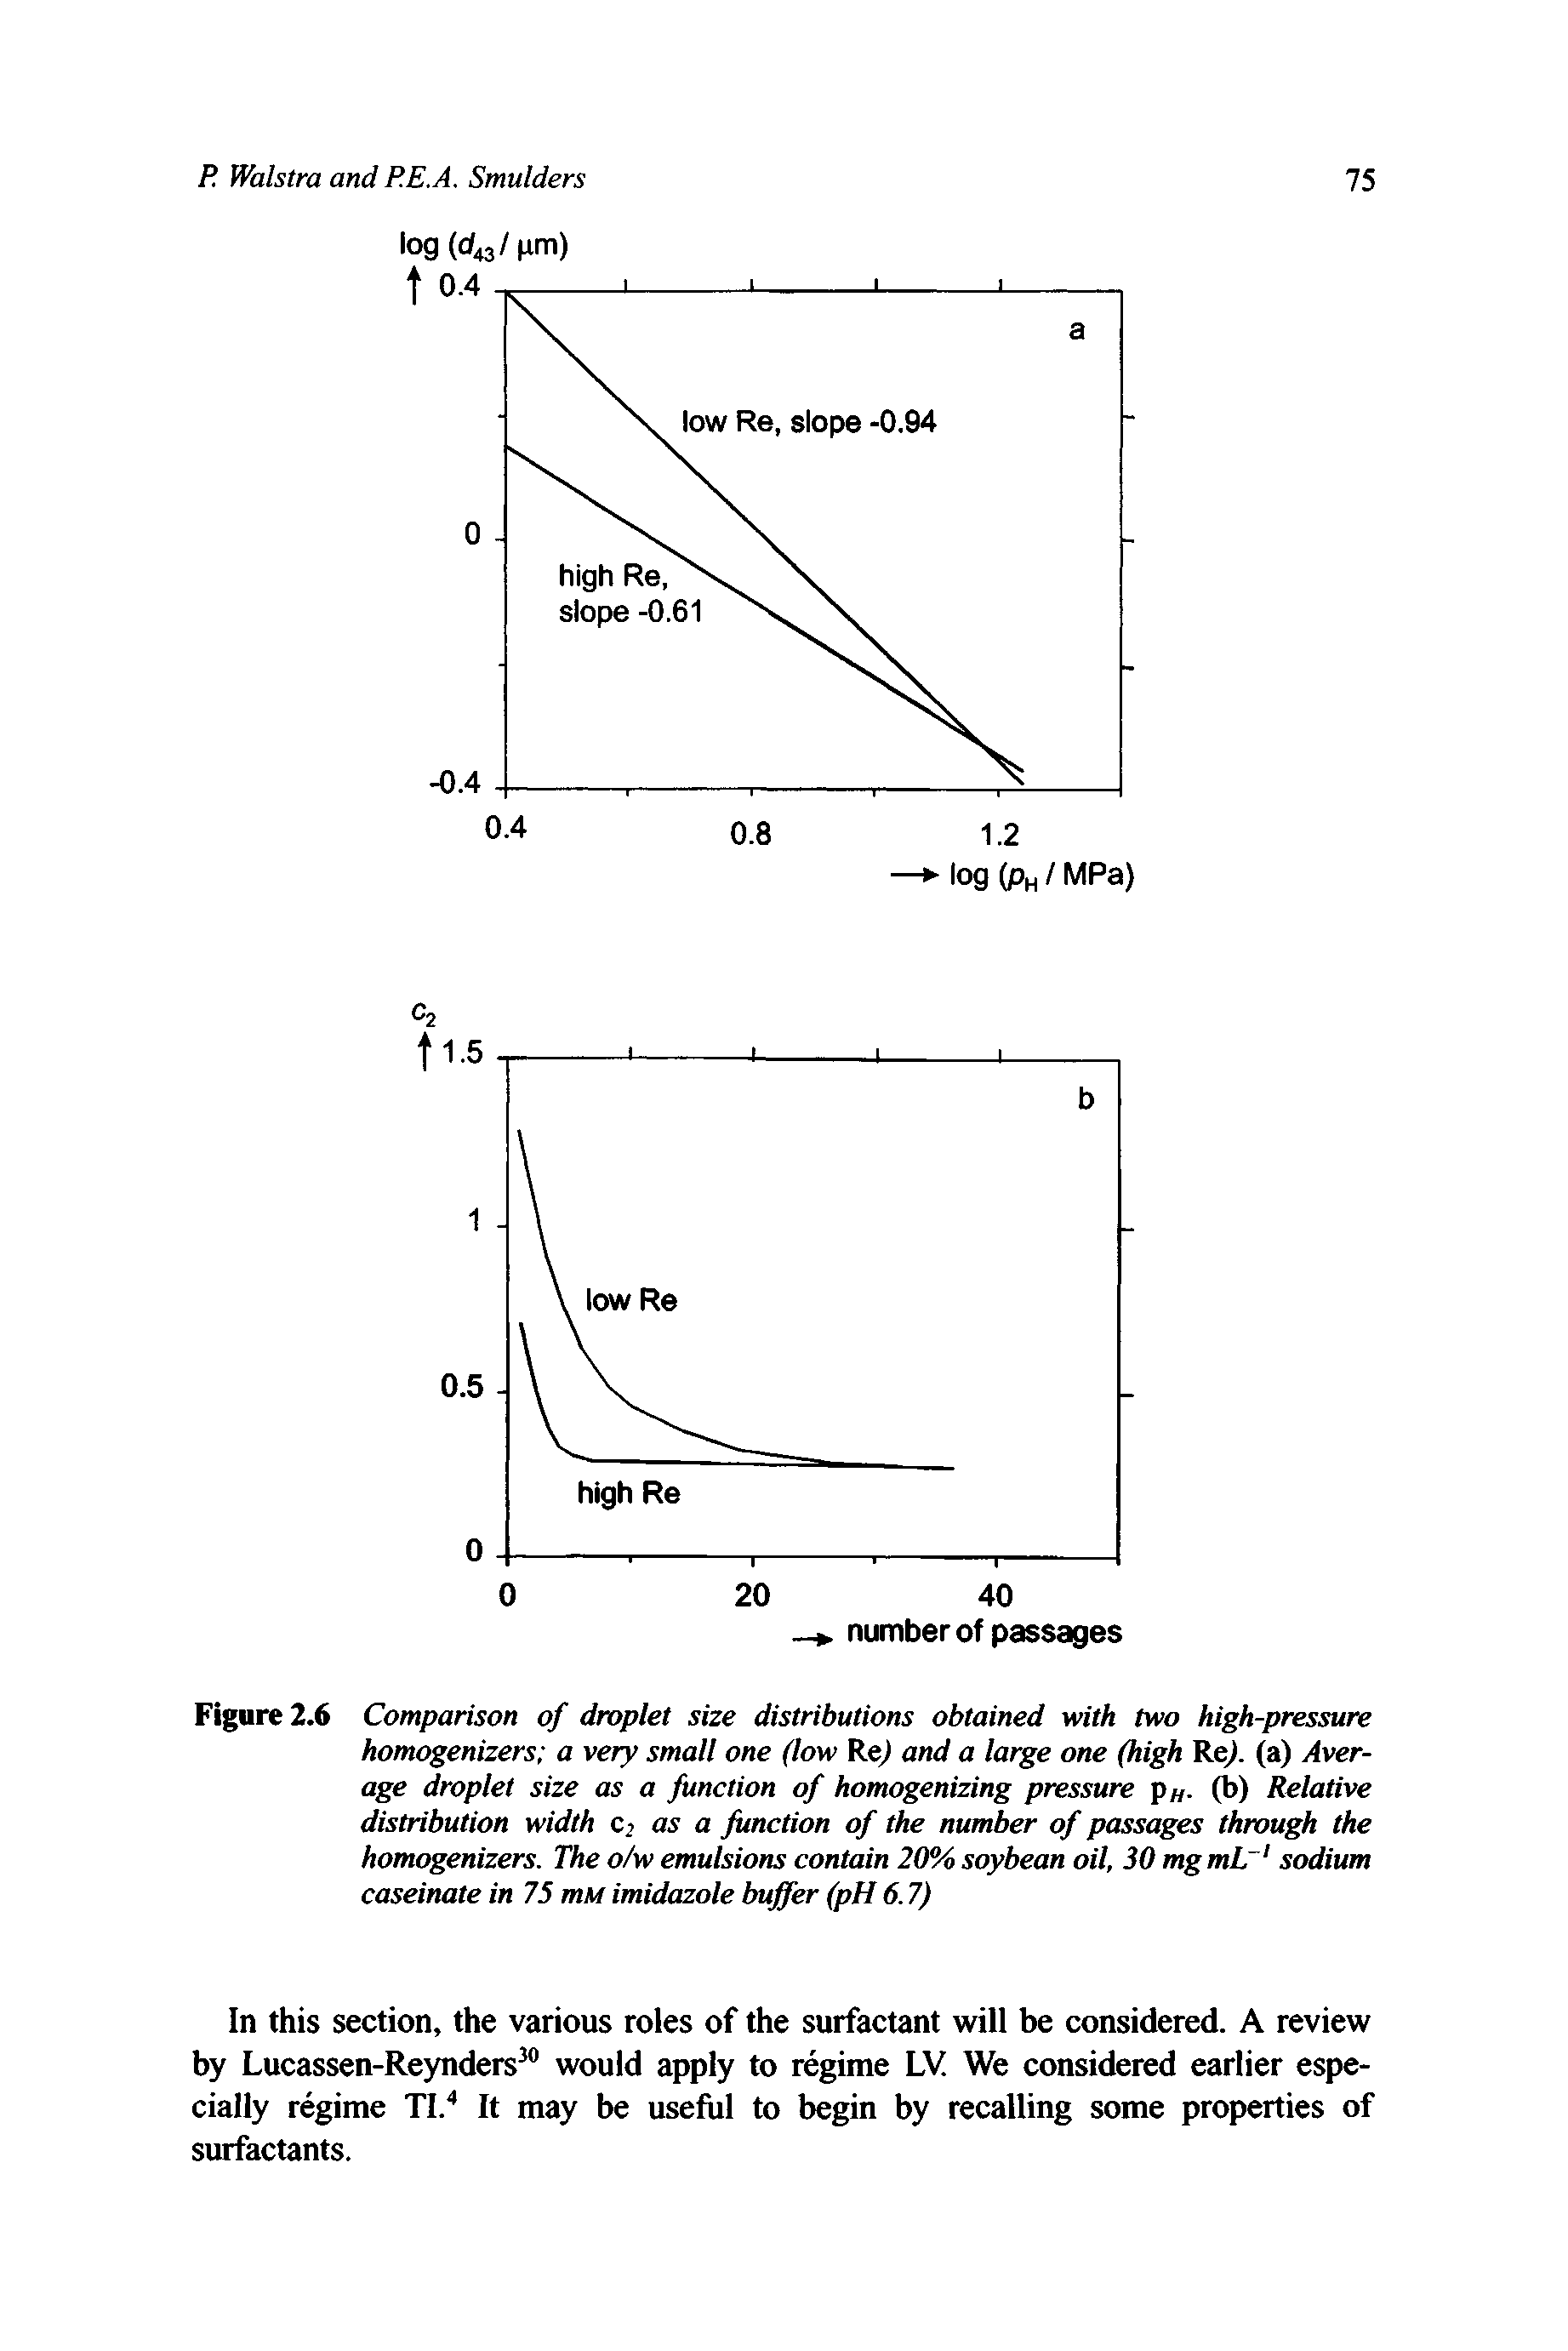 Figure 2.6 Comparison of droplet size distributions obtained -with two high-pressure homogenizers a very small one (low Re and a large one (high Re/ (a) i4ver-age droplet size as a function of homogenizing pressure p . (b) Relative distribution width C2 as a fimction of the number of passages through the homogenizers. The o/w emulsions contain 20% soybean oil. 30 mgmL sodium caseinate in 75 mu imidazole buffer (pH 6.7)...